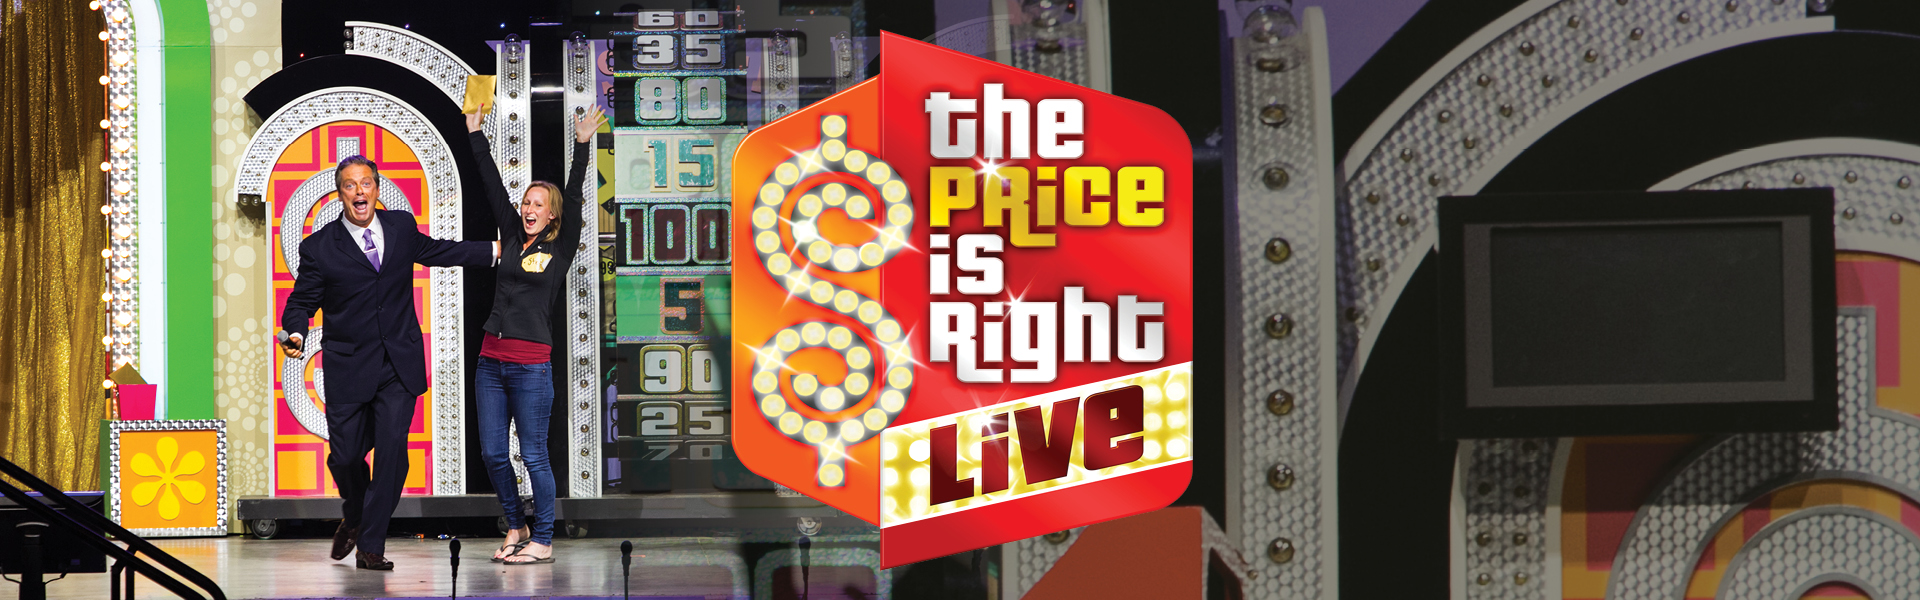 Graphic of The Price is Right LIVE